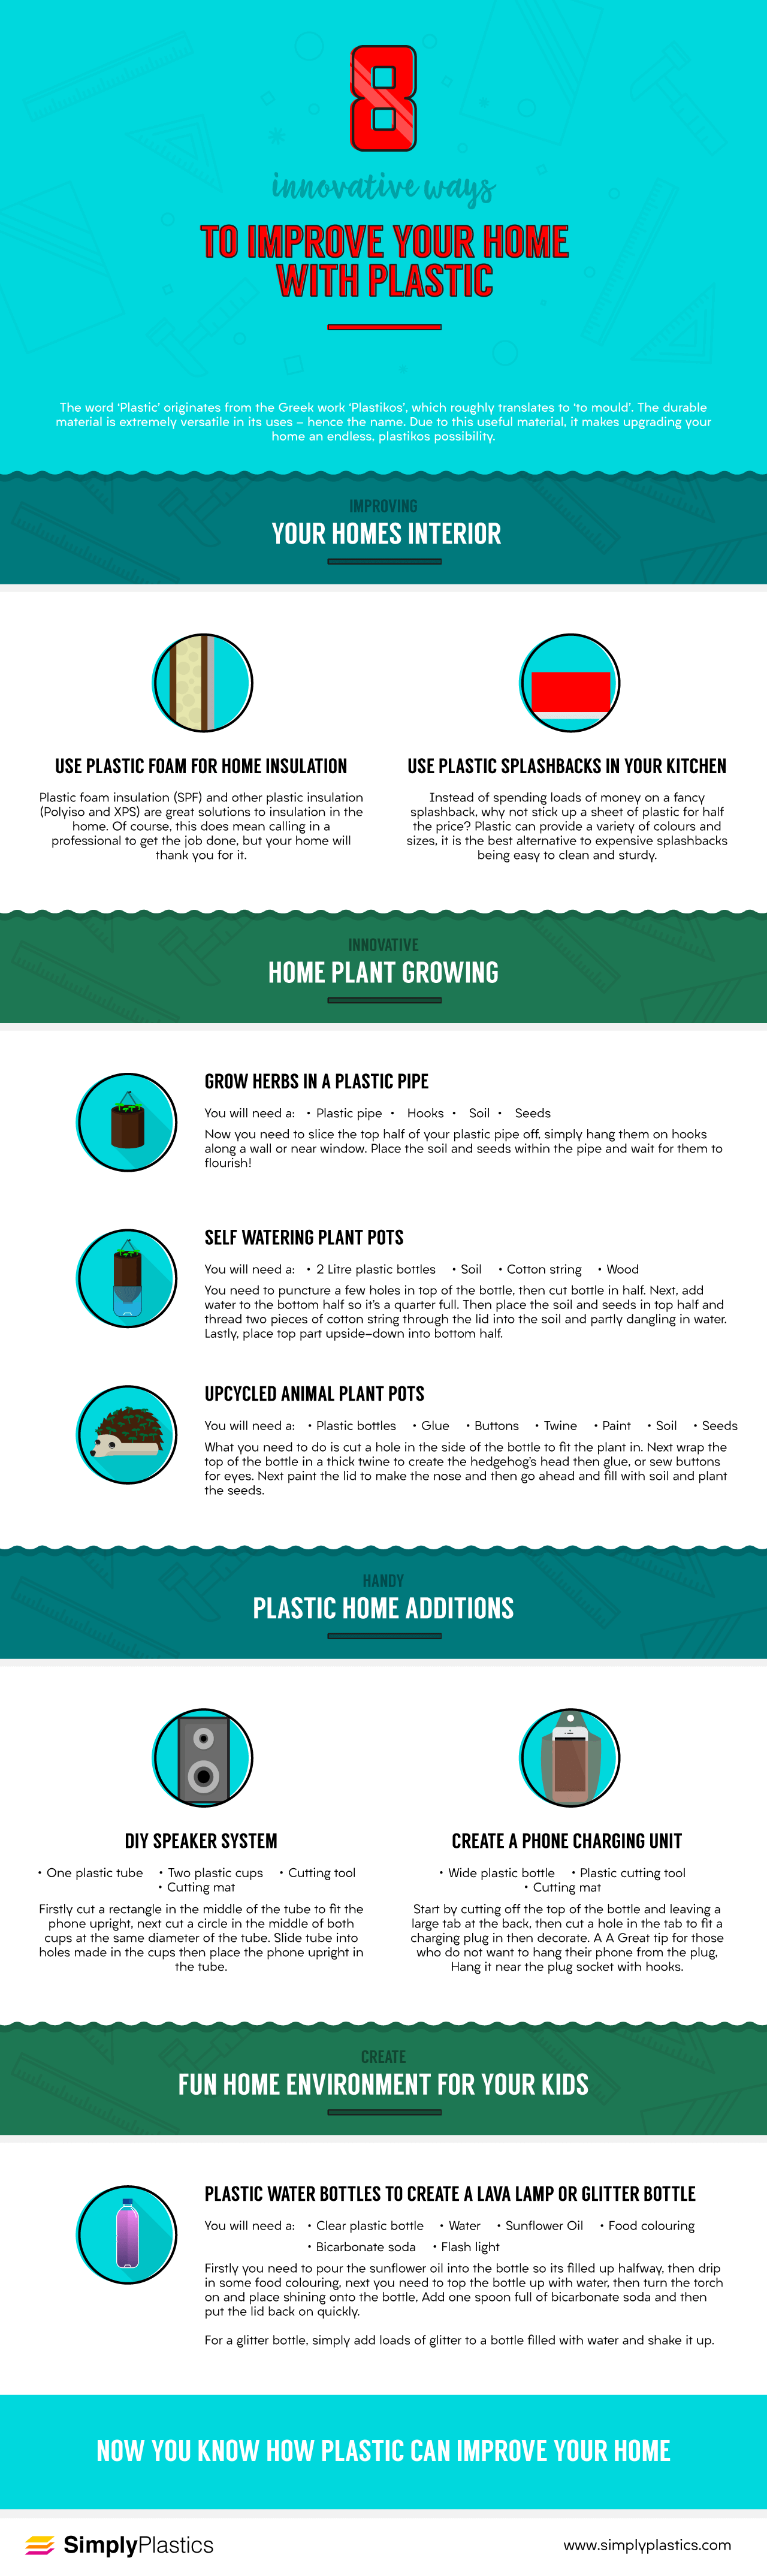 The Guide To Improving Your Home With Plastic